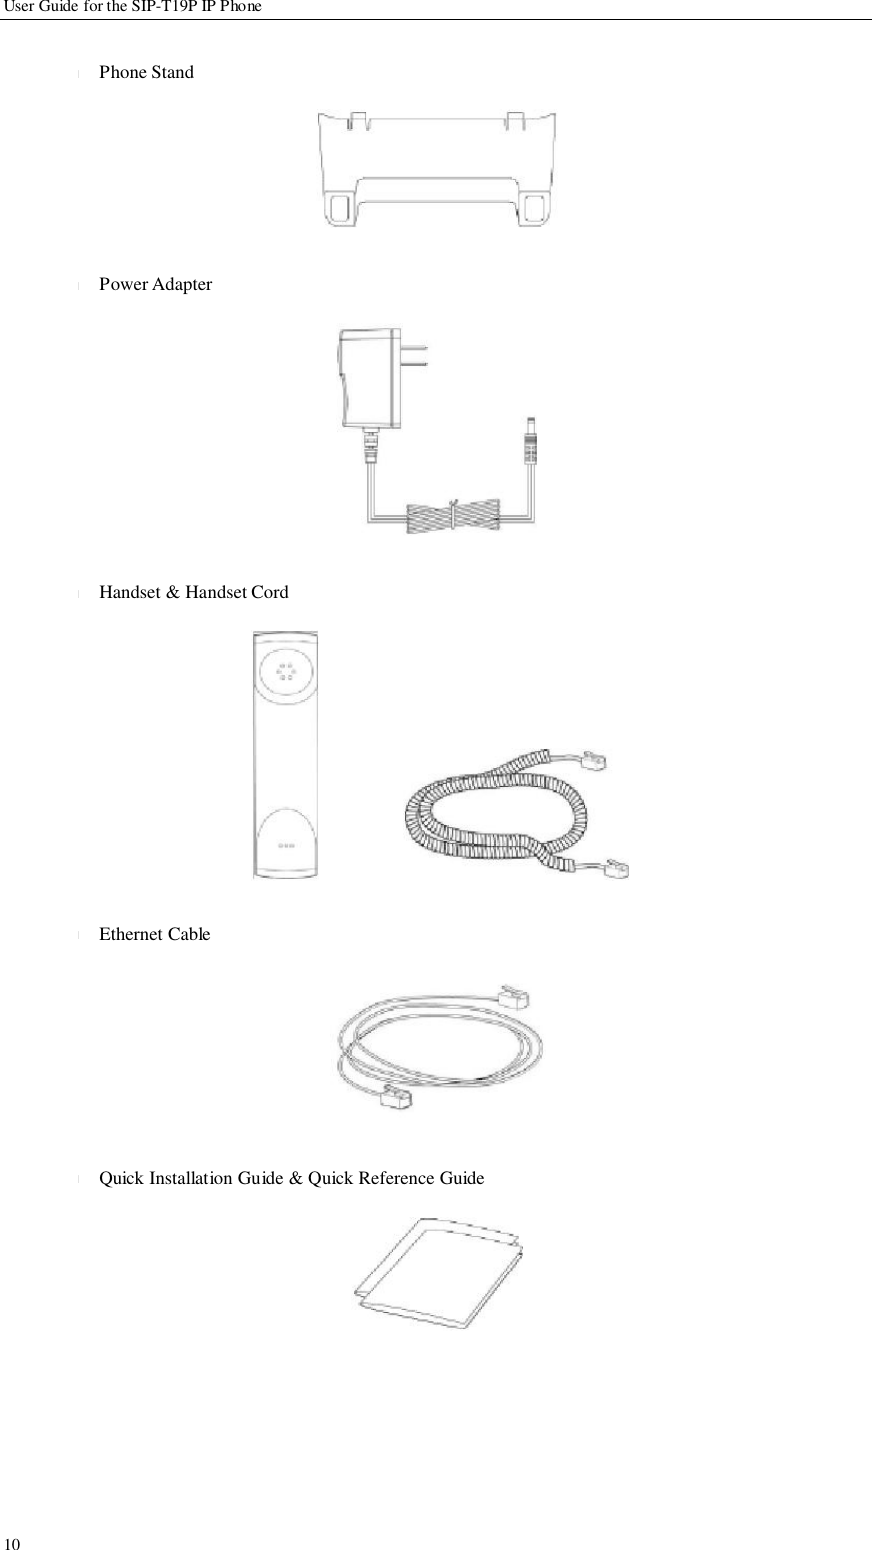                 User Guide for the SIP-T19P IP Phone                                                                         10   l          l               l                l            l   Phone Stand         Power Adapter              Handset &amp; Handset Cord                Ethernet Cable           Quick Installation Guide &amp; Quick Reference Guide